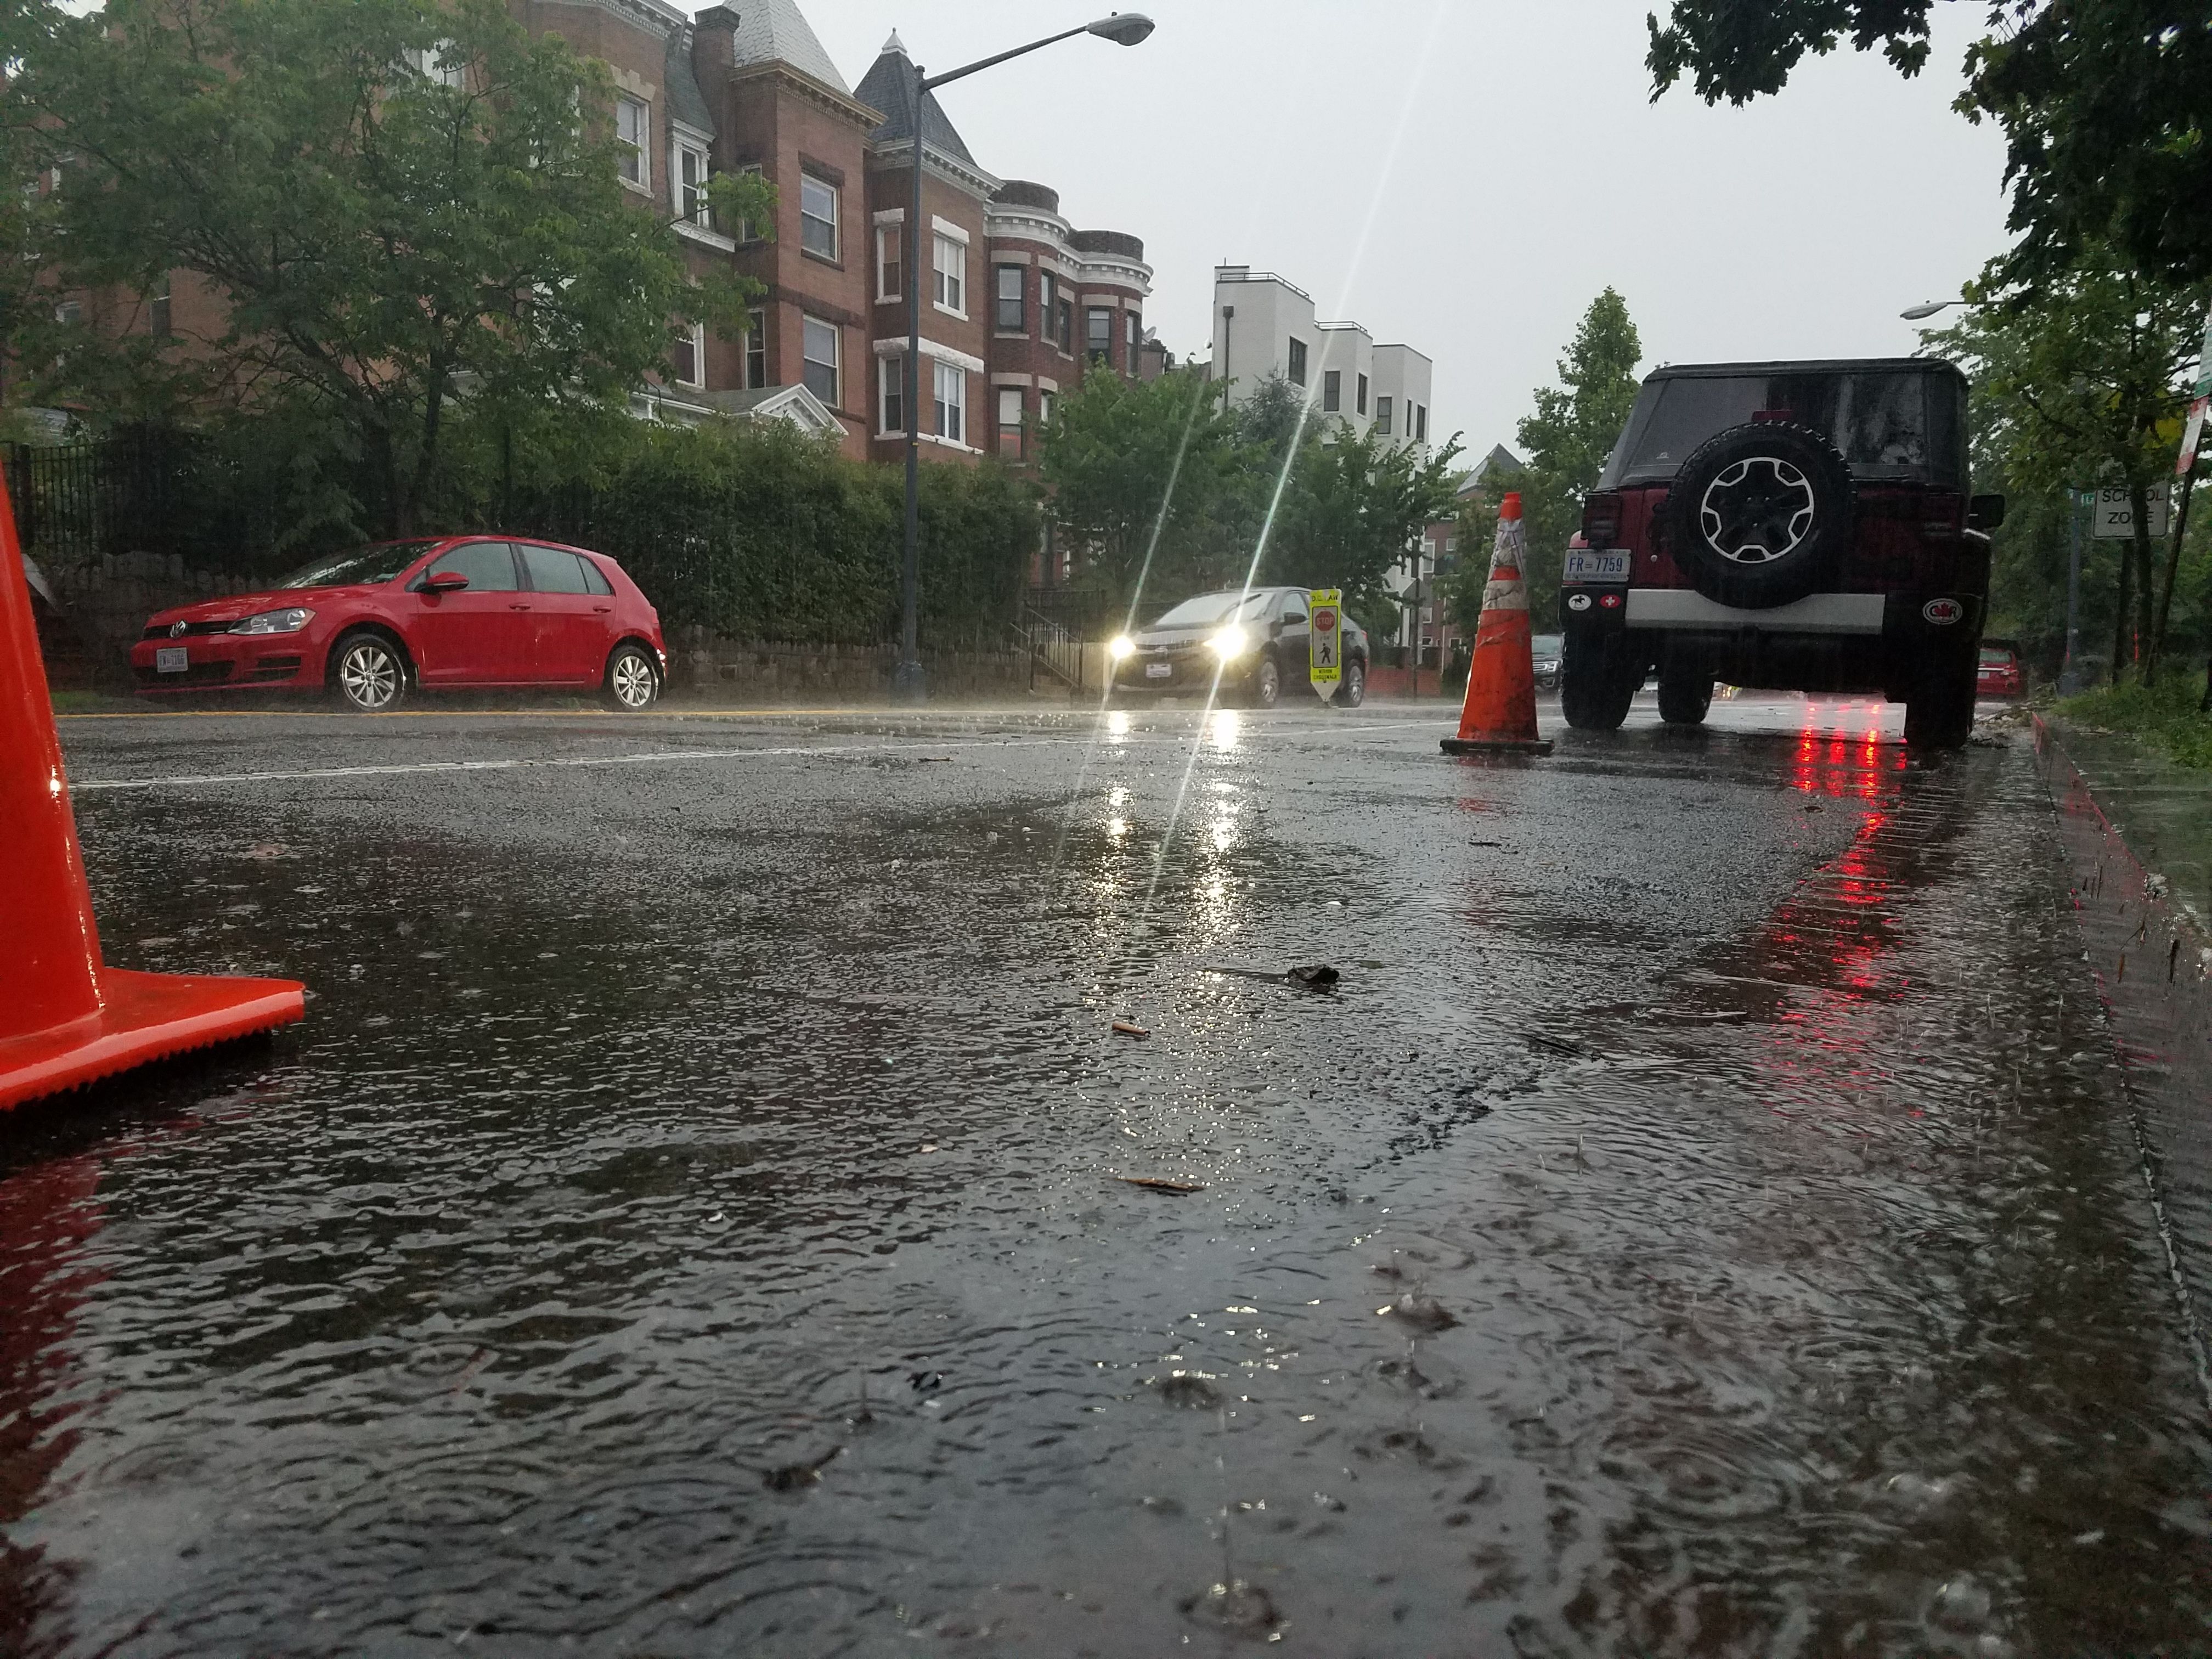 Flash flood watch issued for DC area as severe weather threatens wind